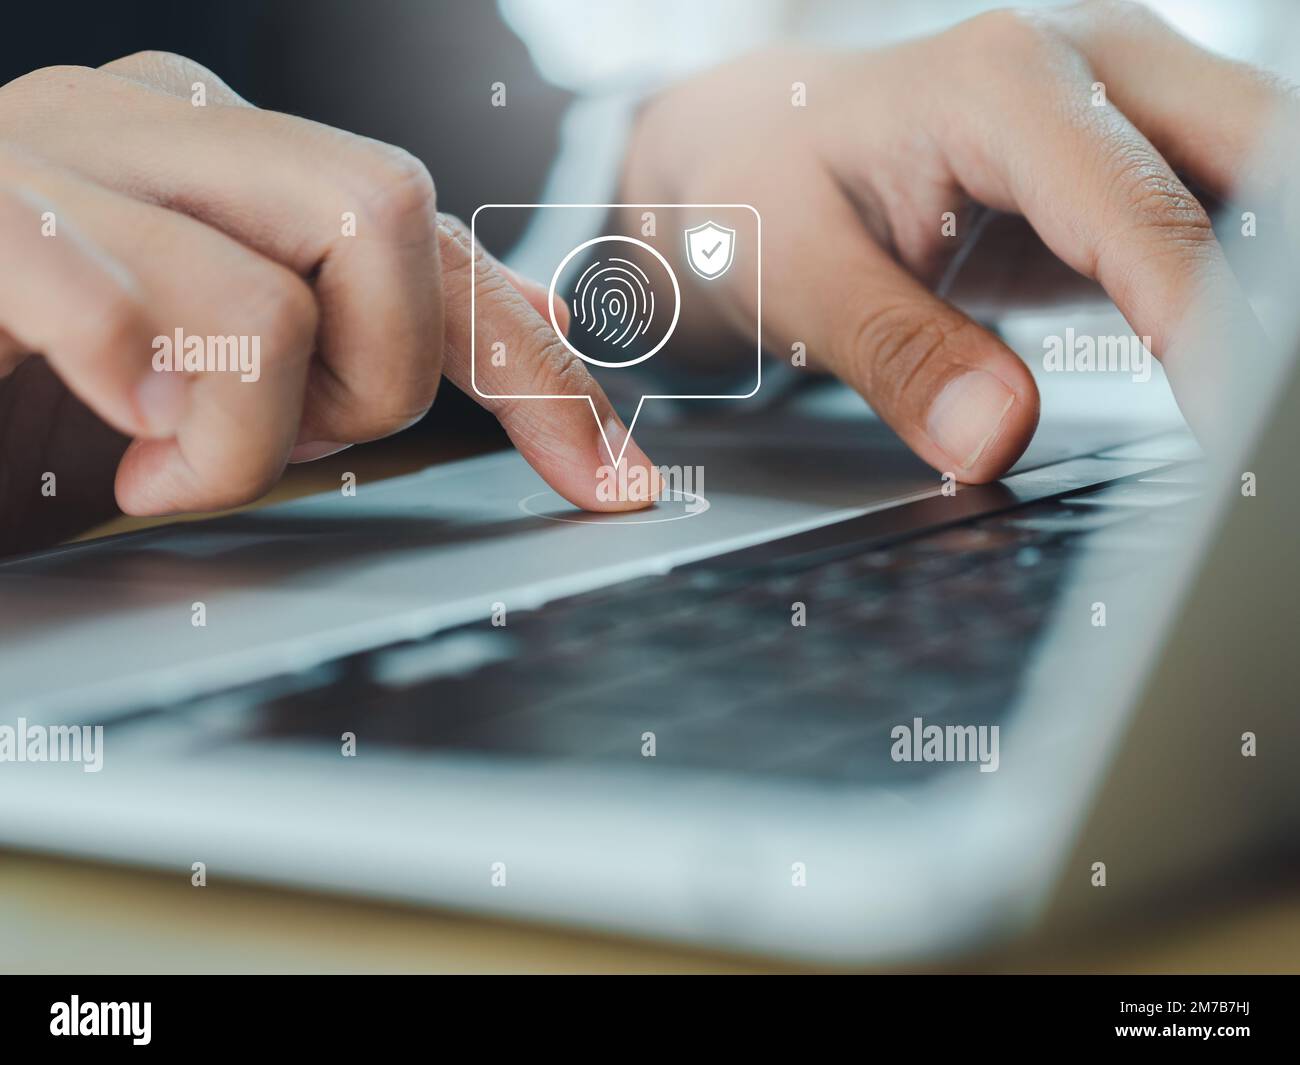 Fingerprint icon with safety shield in speech bubble while business person finger scanning for access on touchpad on laptop computer, login with biome Stock Photo